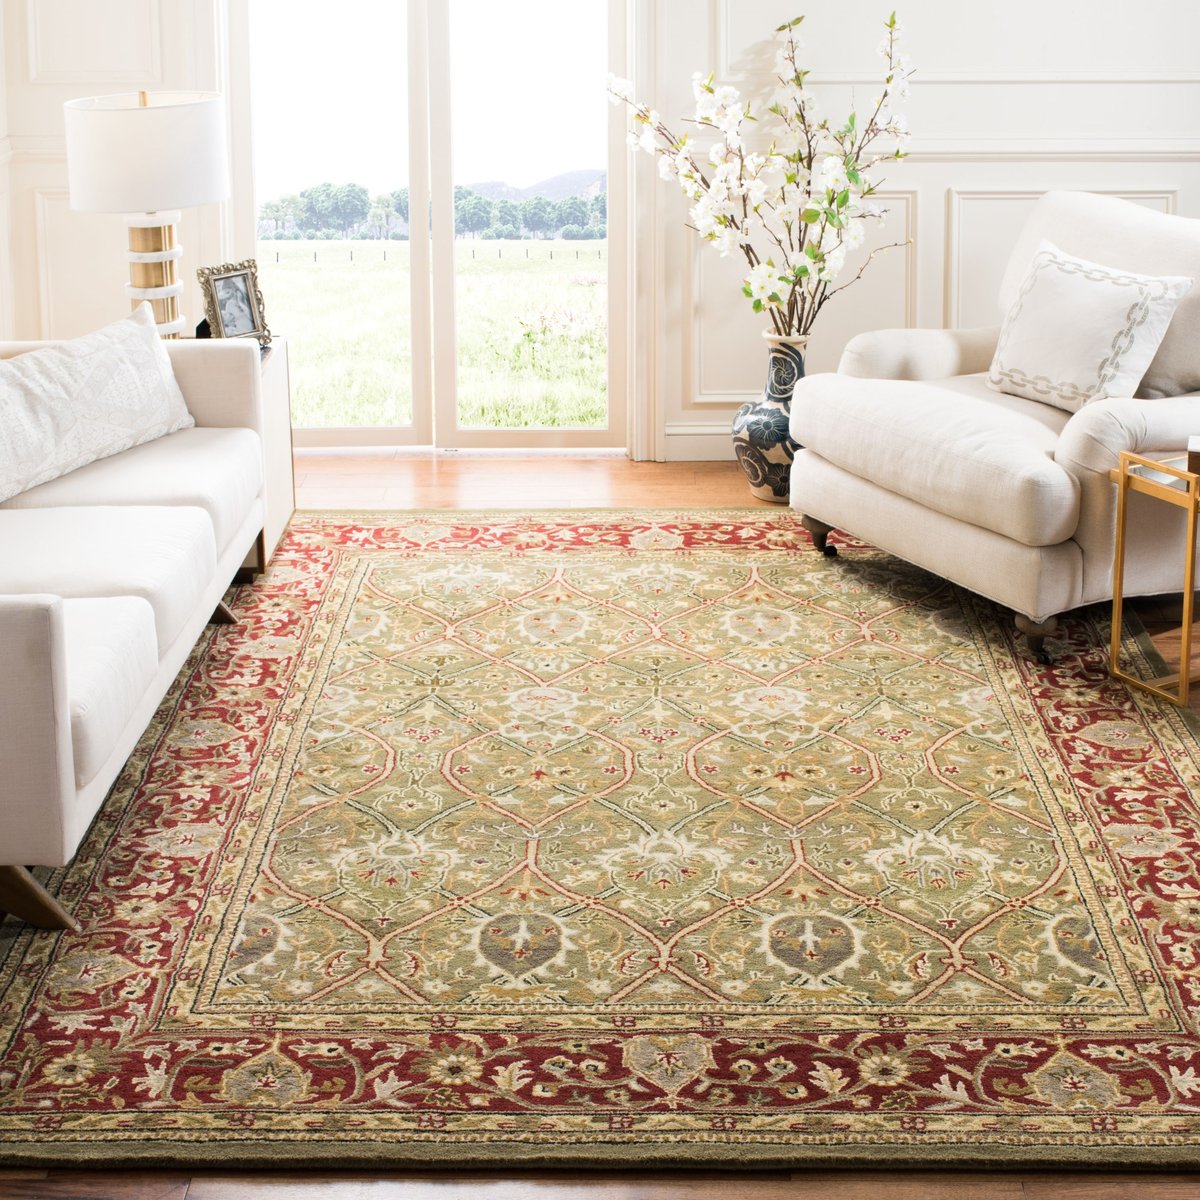 Safavieh Persian Legend Ii Pl 819 Rugs, Traditional Area Rugs Sage Green